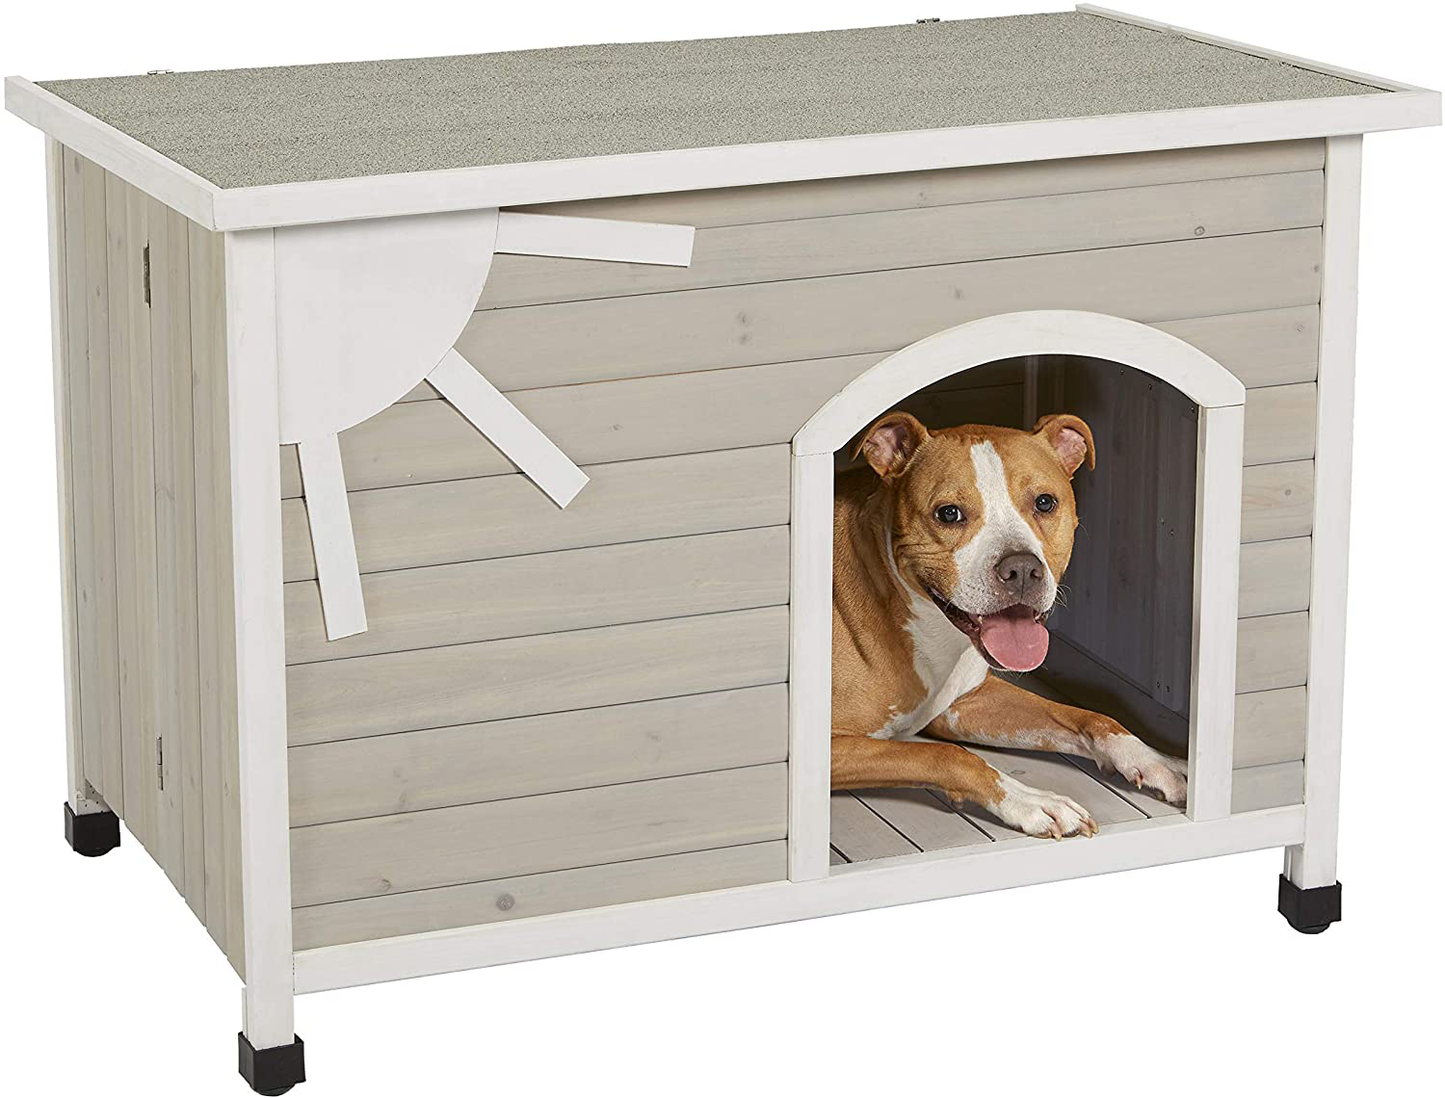 Midwest Homes for Pets Eillo Folding Outdoor Wood Dog House, No Tools Required for Assembly | Dog House Ideal for Medium Dog Breeds, Beige (12EWDH-M)